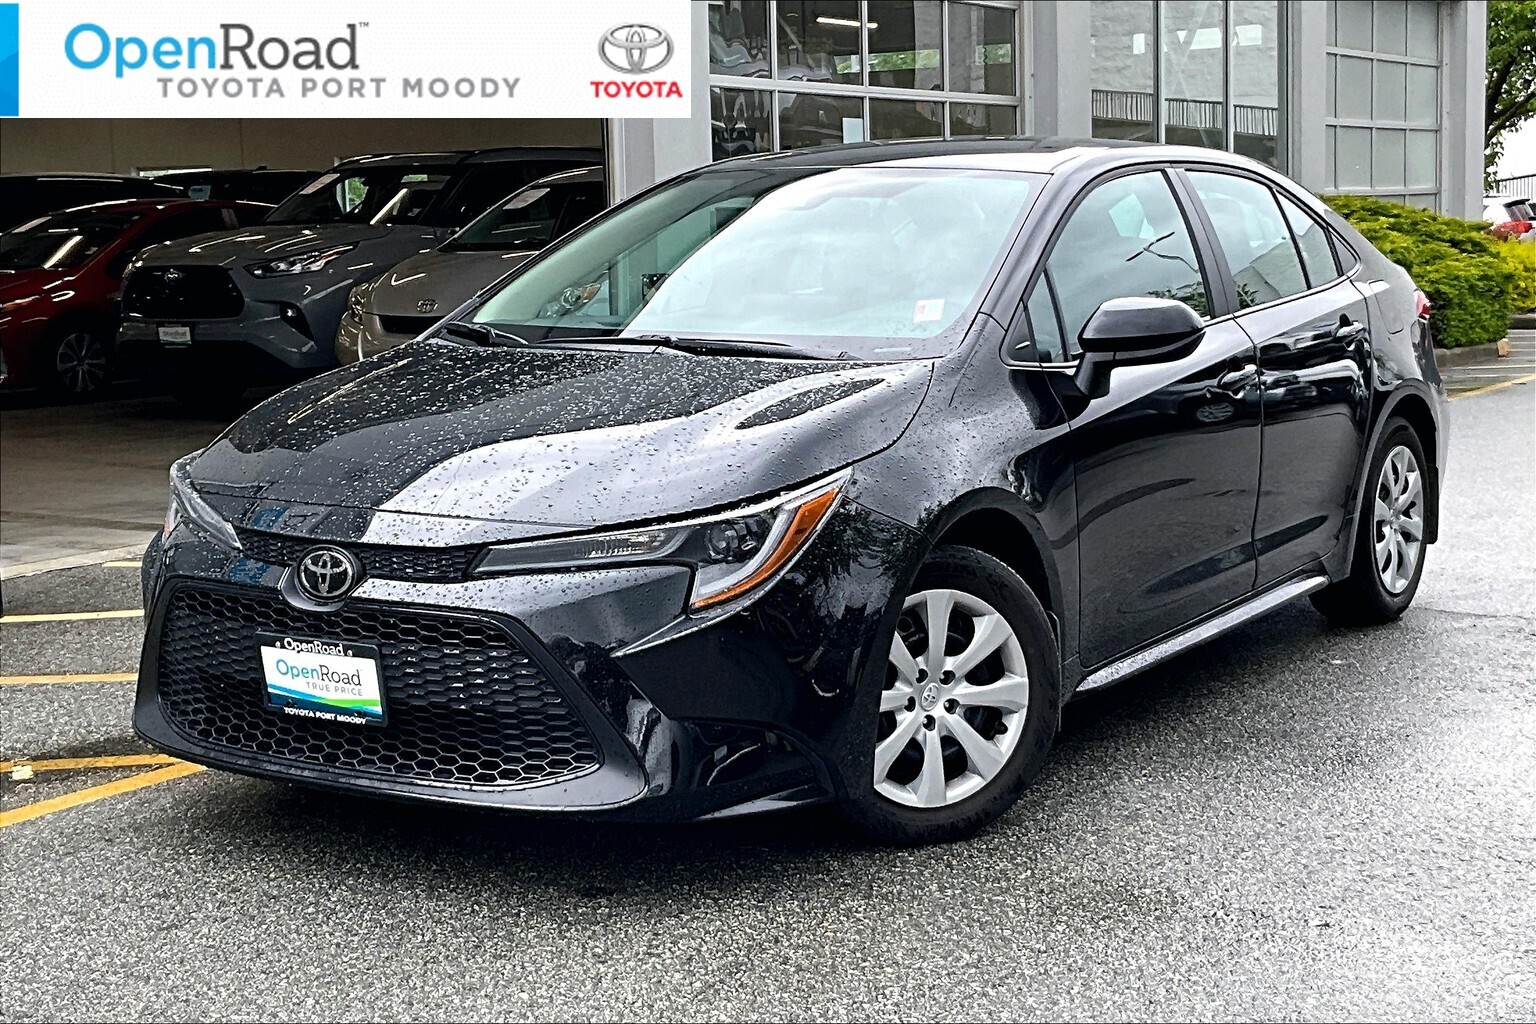 2022 Toyota Corolla LE CVT |OpenRoad True Price |Local |One Owner| No 